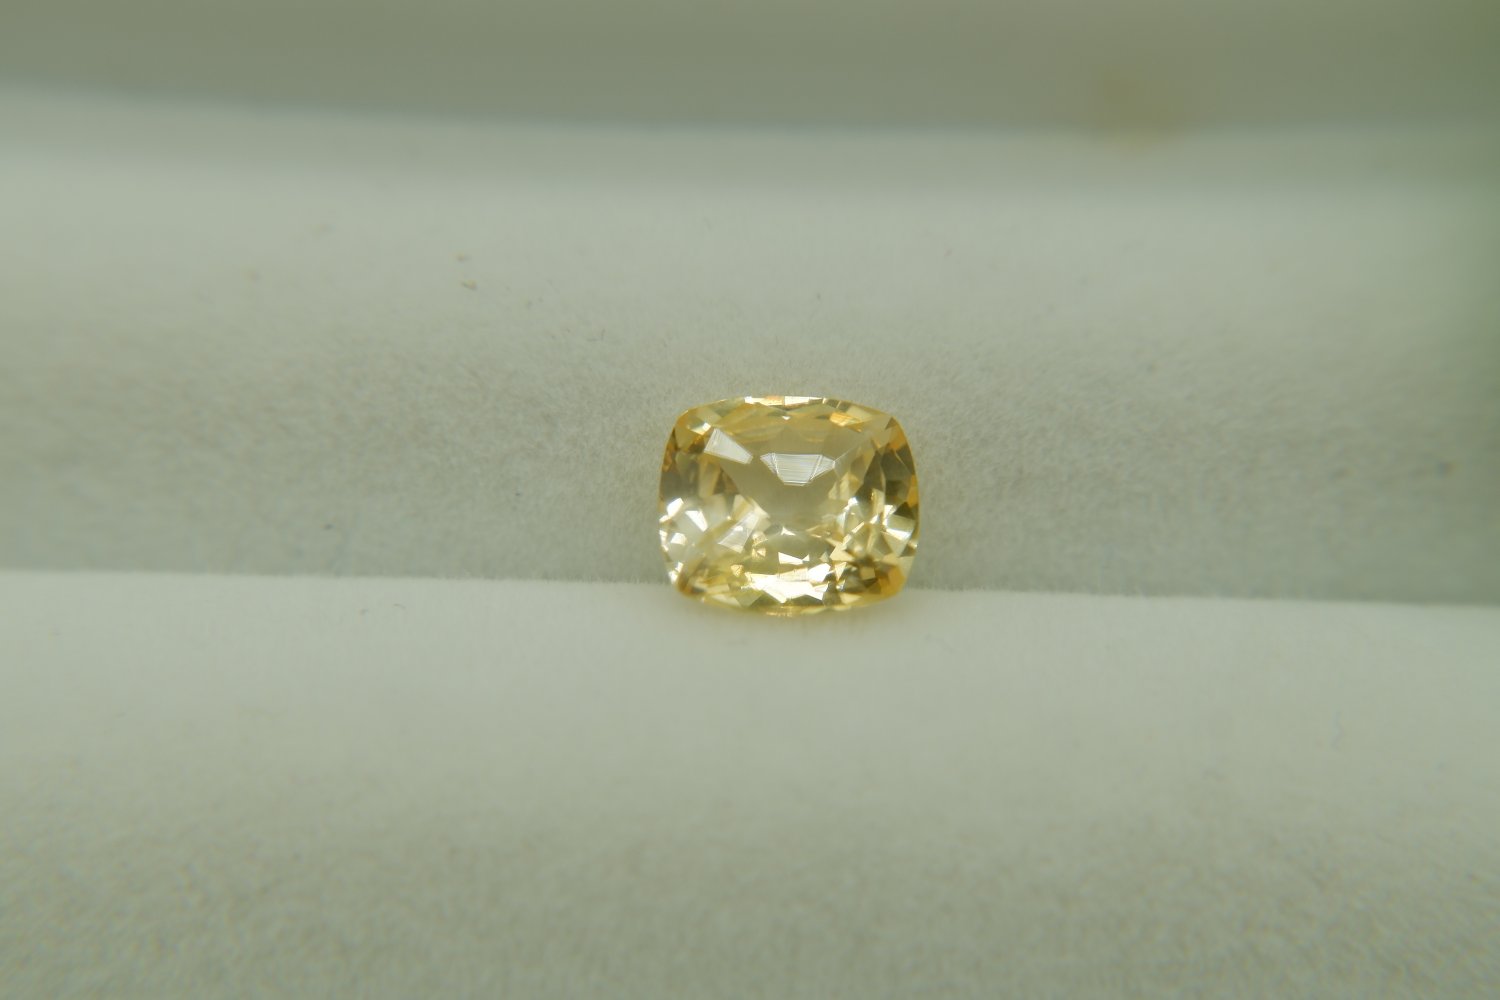  Lemon Yellow Sapphire, handcrafted design cut premium handcrafted rectangular cut with lustrous fin